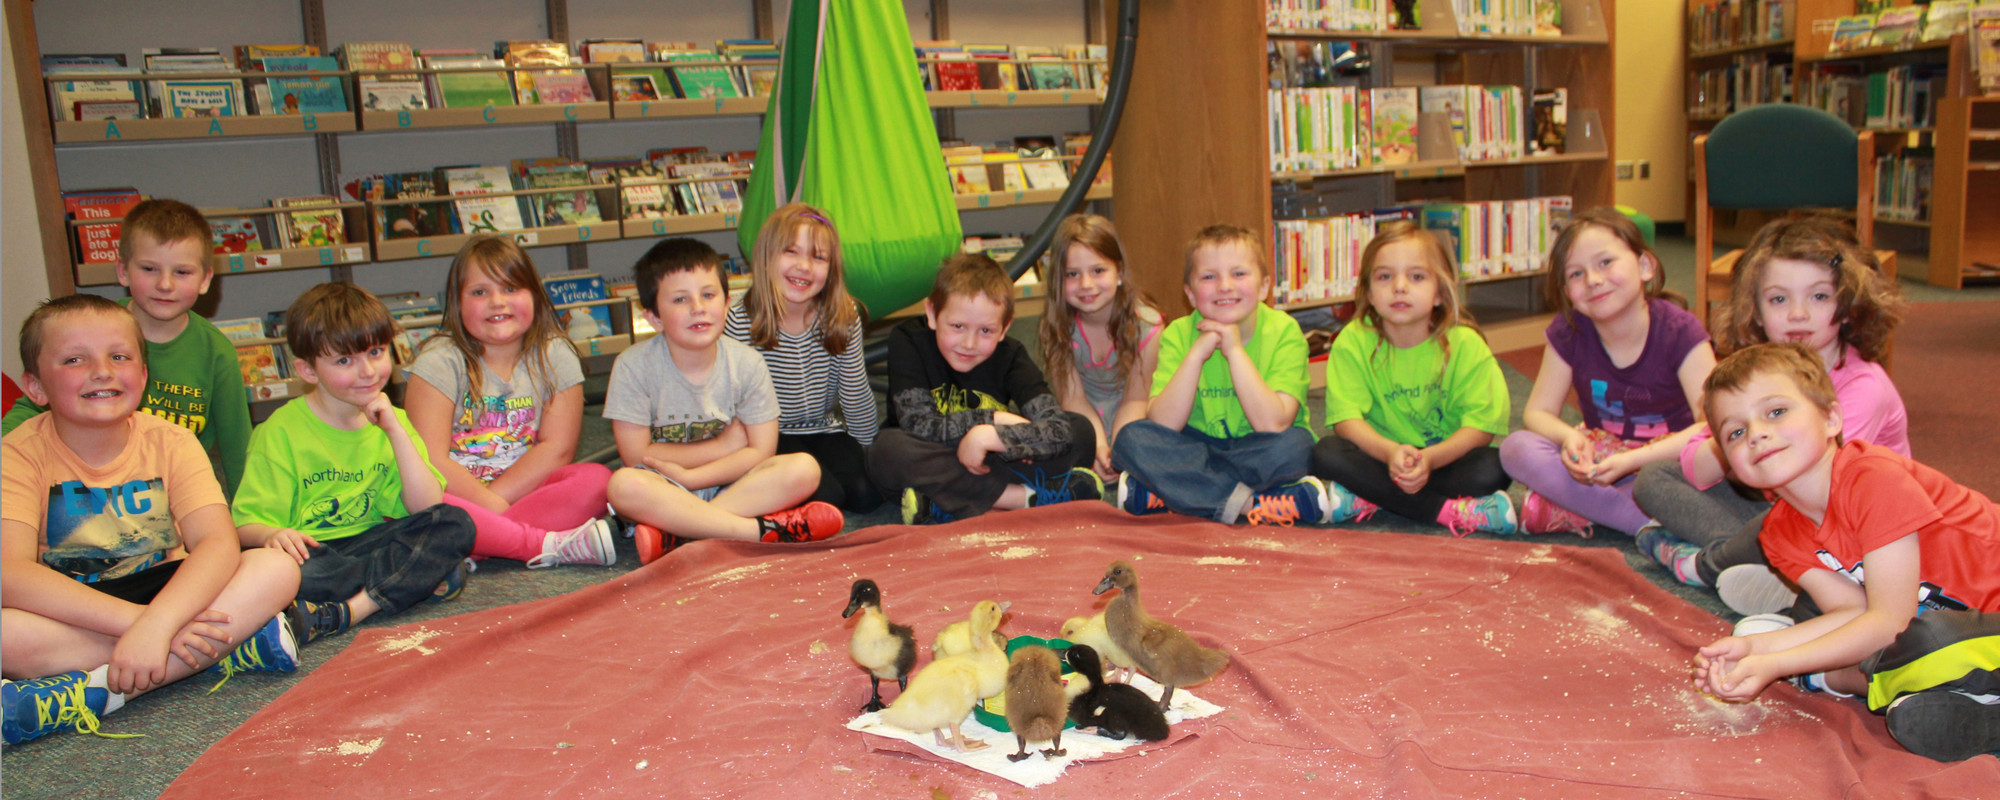 Land O'Lakes Elementary School - Ducklings and Students